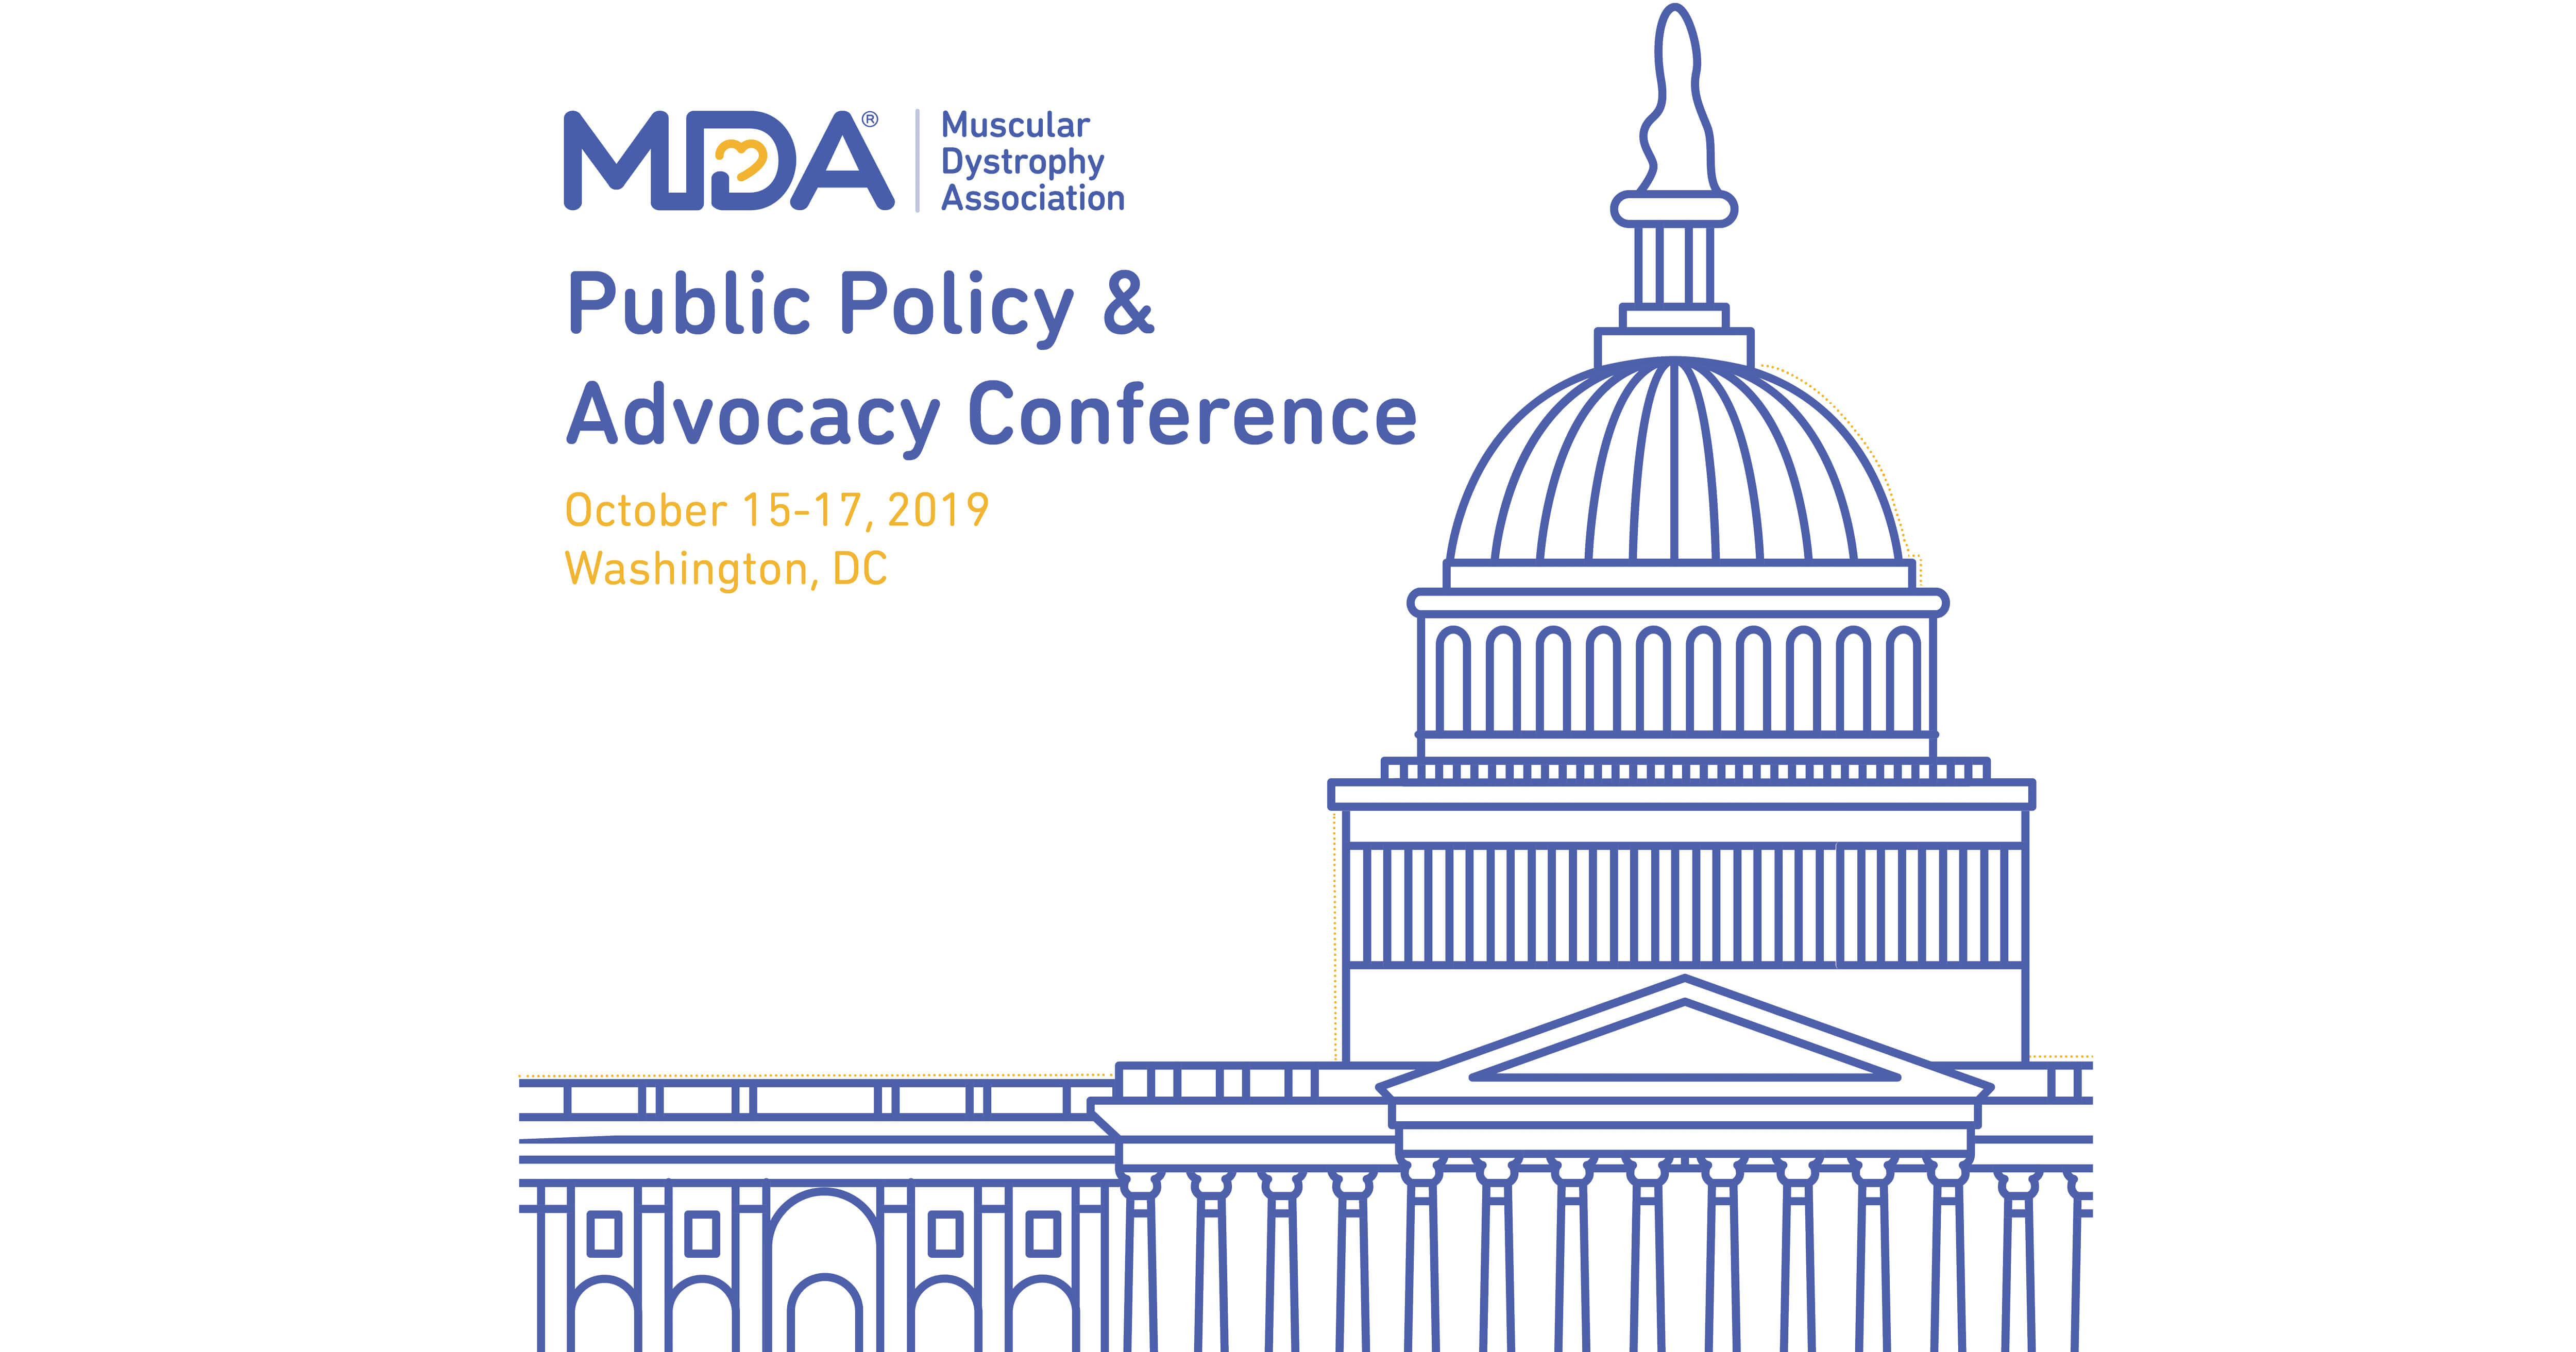 Register Now to Attend MDA’s Public Policy and Advocacy Conference